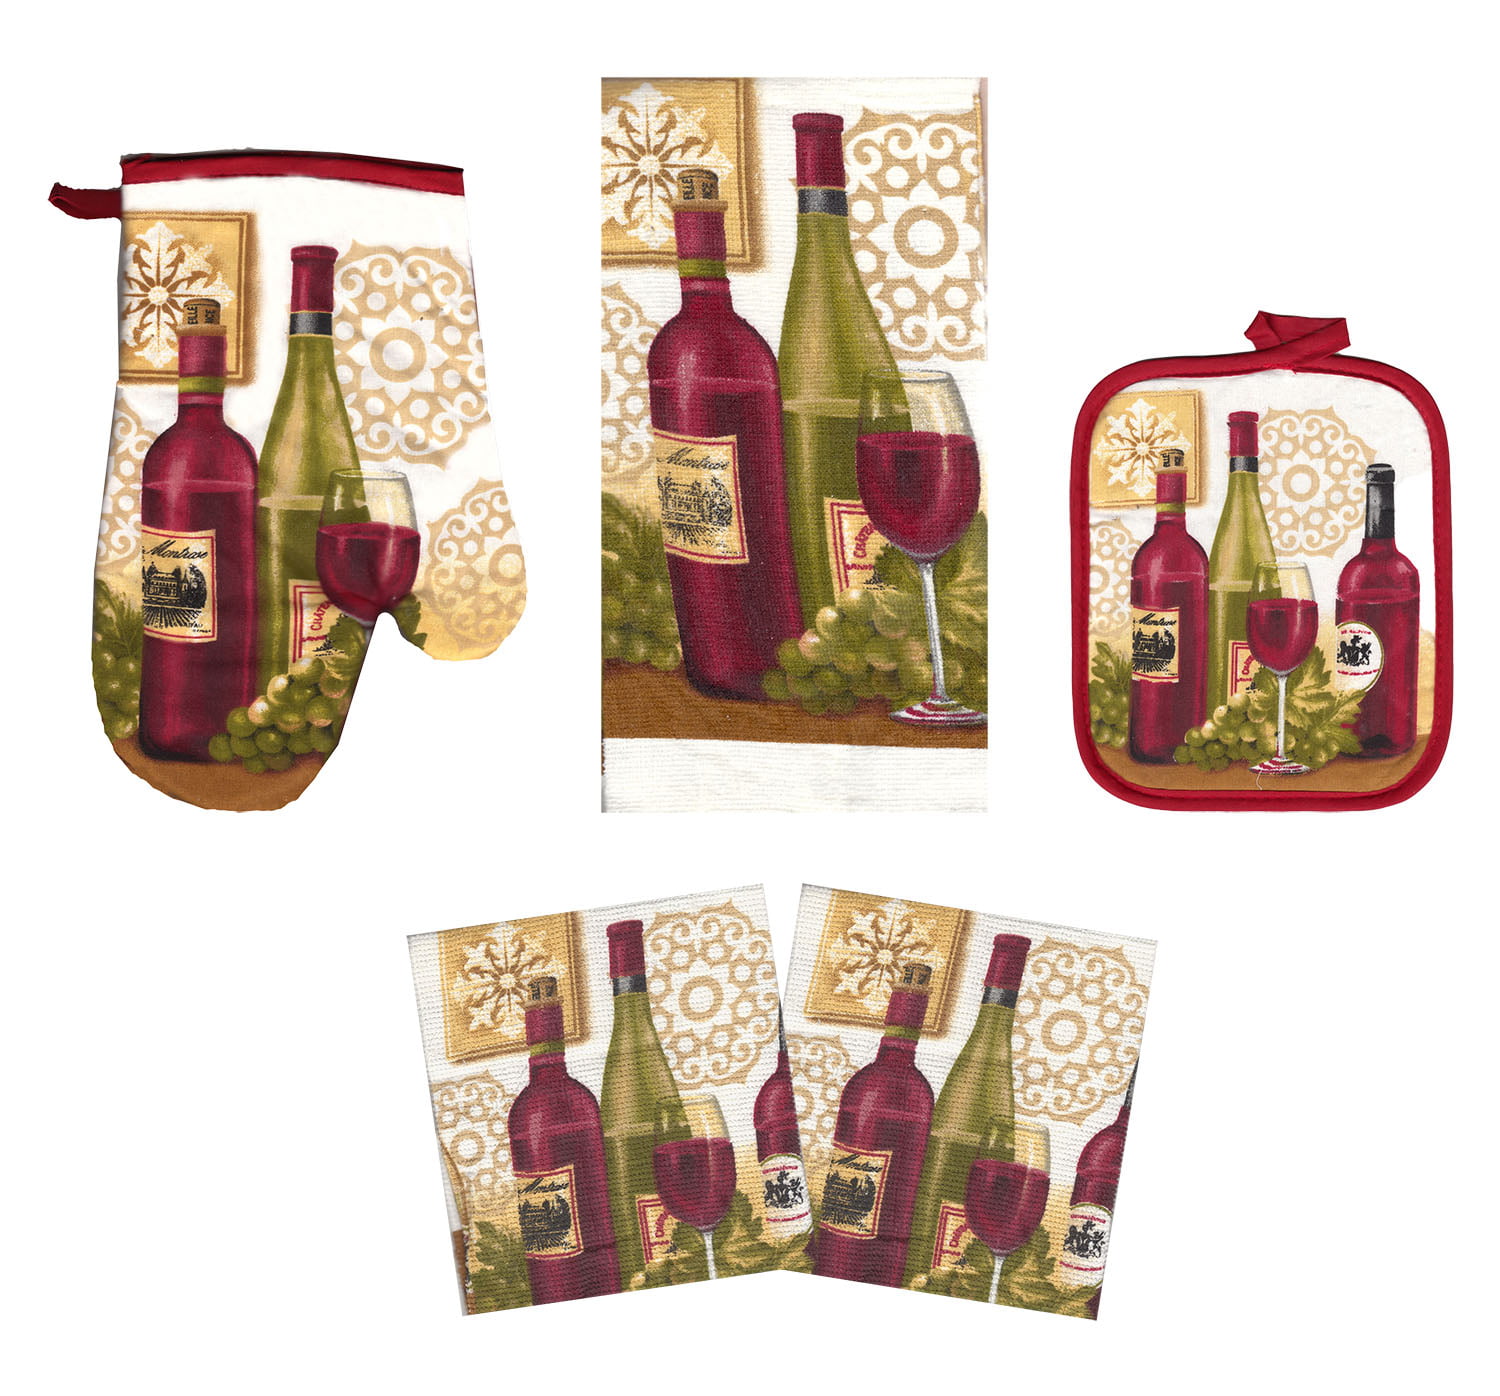 Details about   5Piece Wake Up And Smell The Coffee 2 Decor Potholders 1 Oven mitt 2 Towels set 